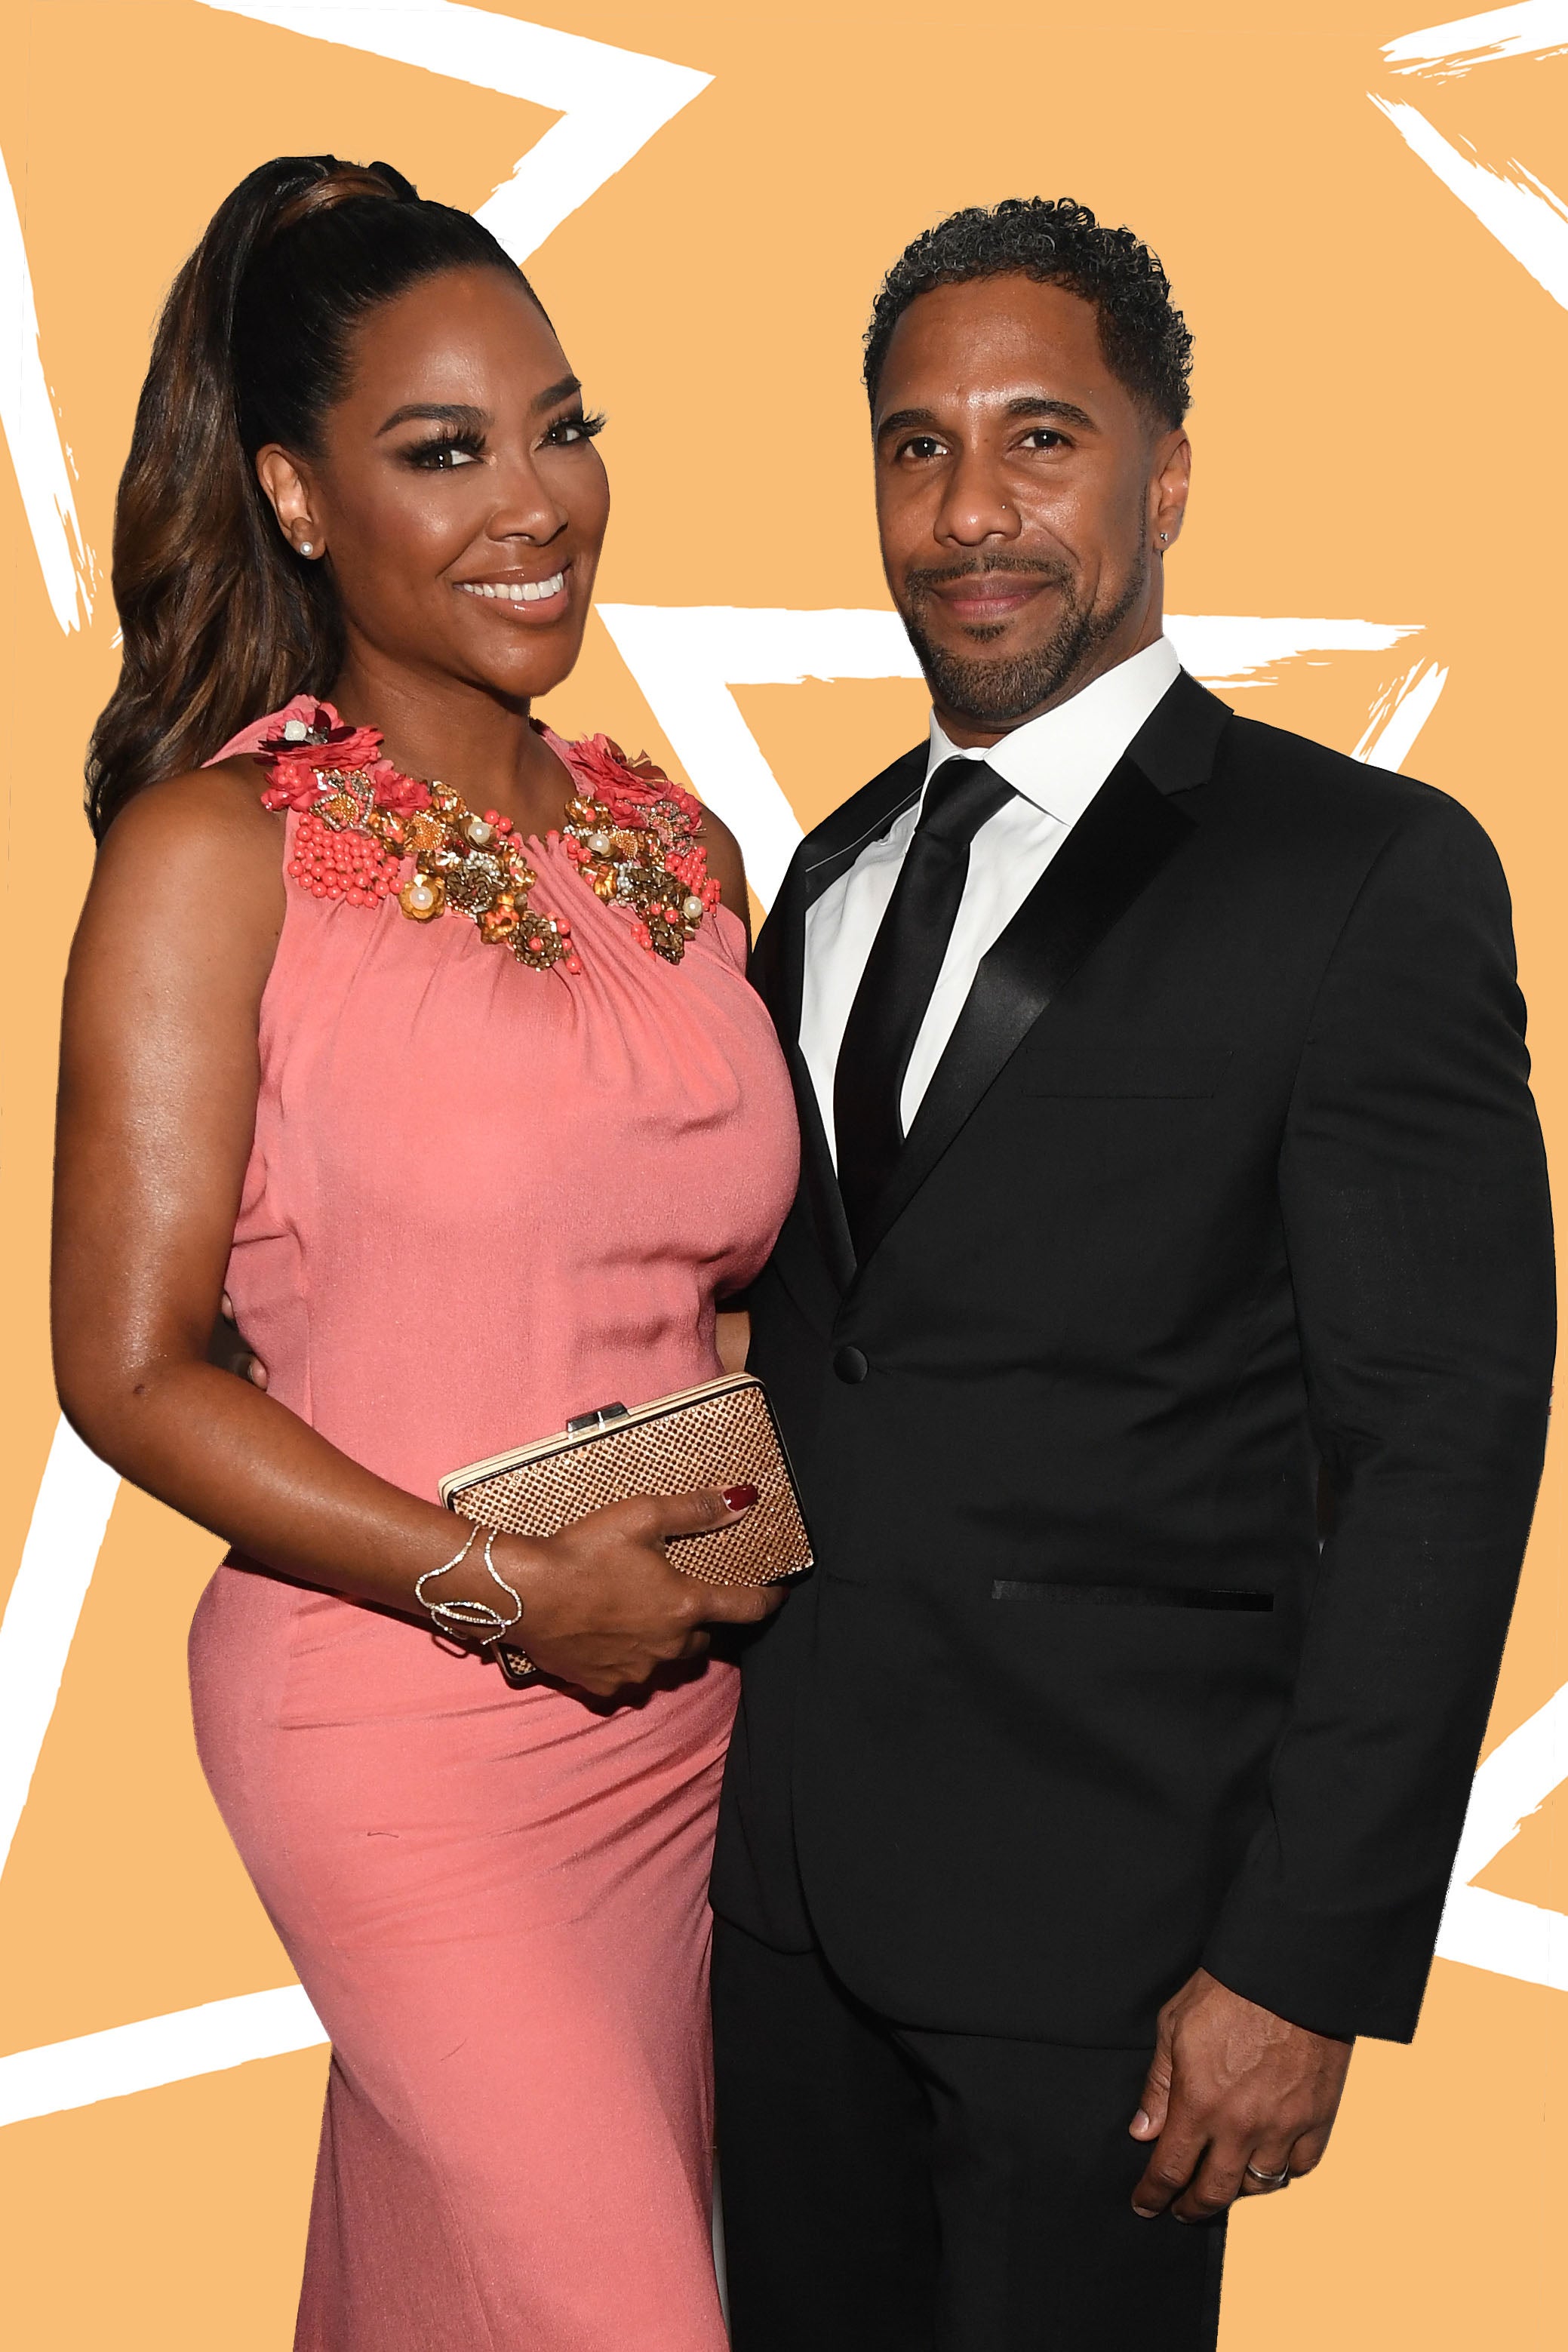 Kenya Moore Says She Hasn't Met Her Husband Marc Daly's Parents Yet
